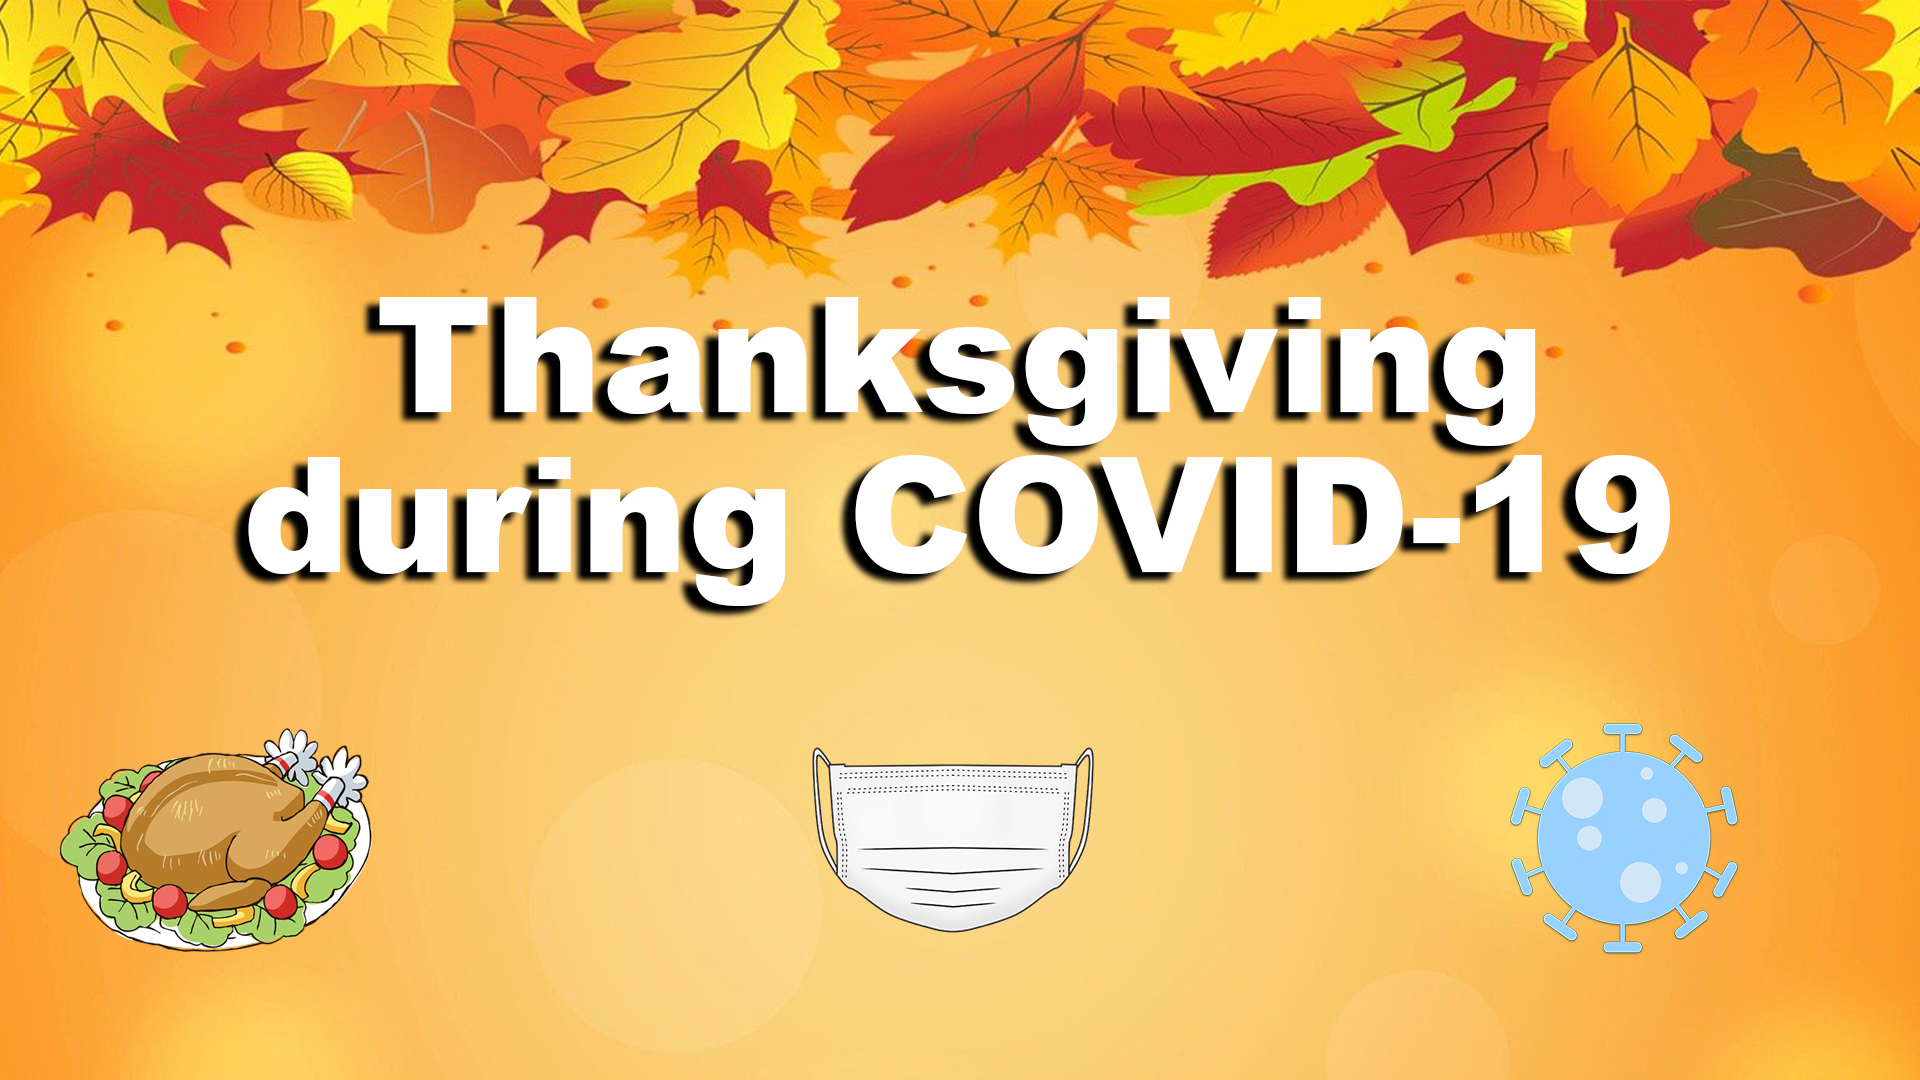 Celebrating Thanksgiving amid the COVID-19 pandemic